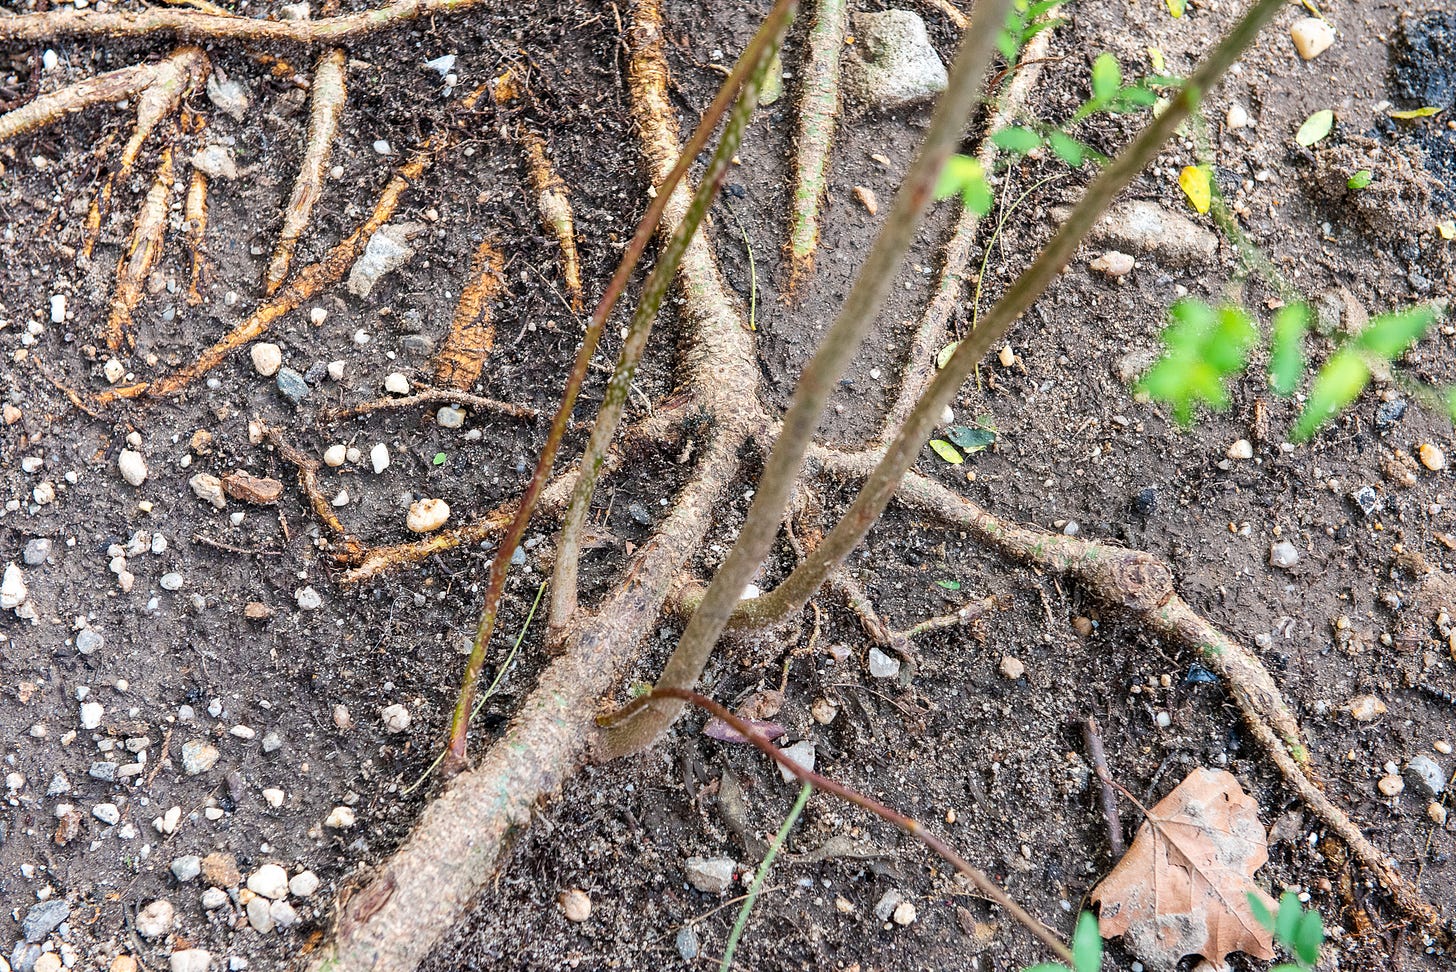 ID: Root suckers shooting up from exposed root